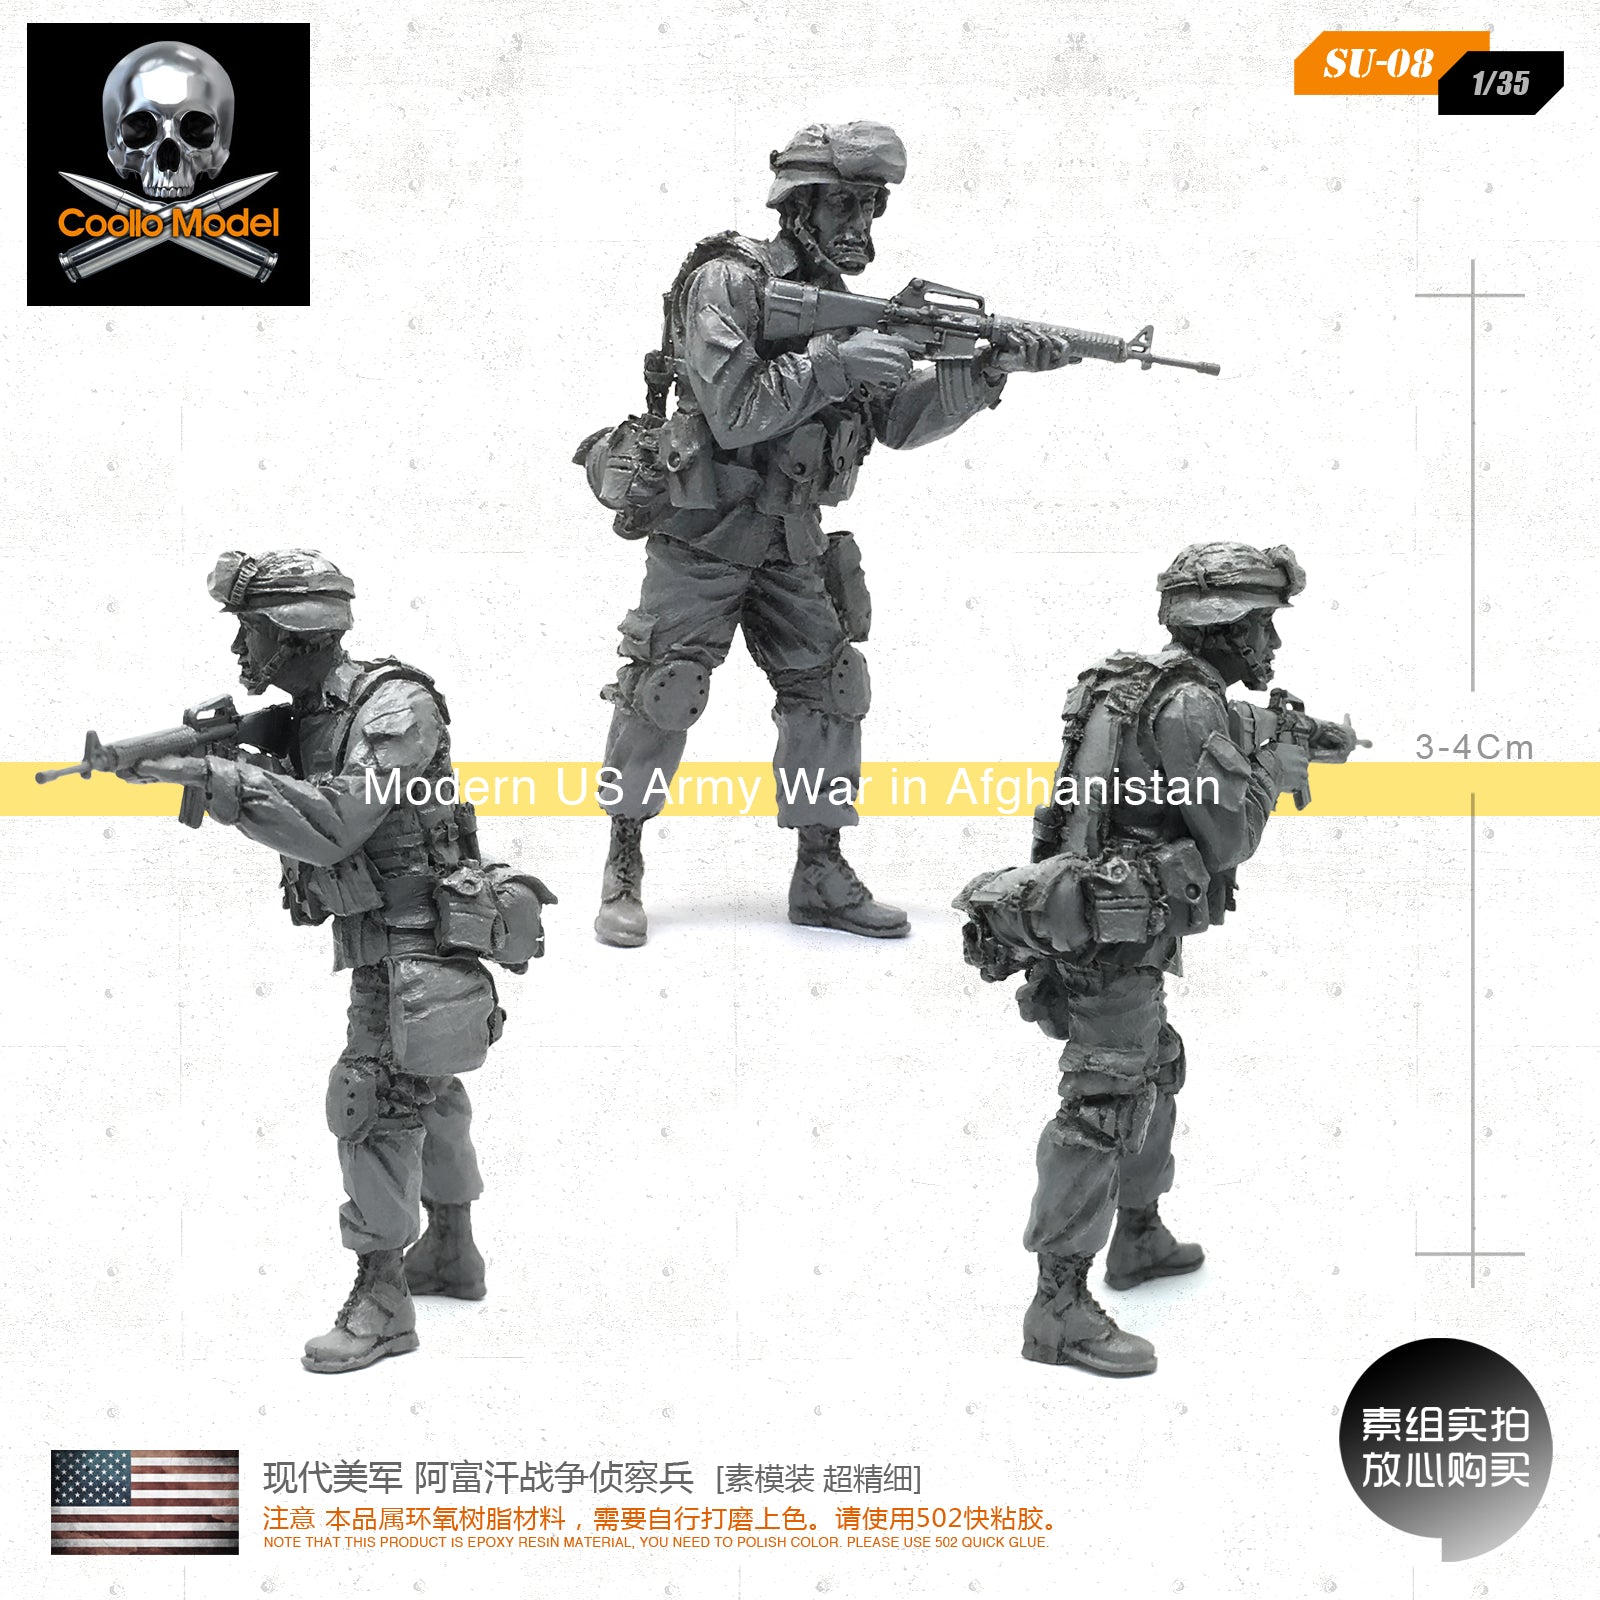 1/35 modern US Army soldiers soldiers Afghan war scout [prime mold super fine] SU-08